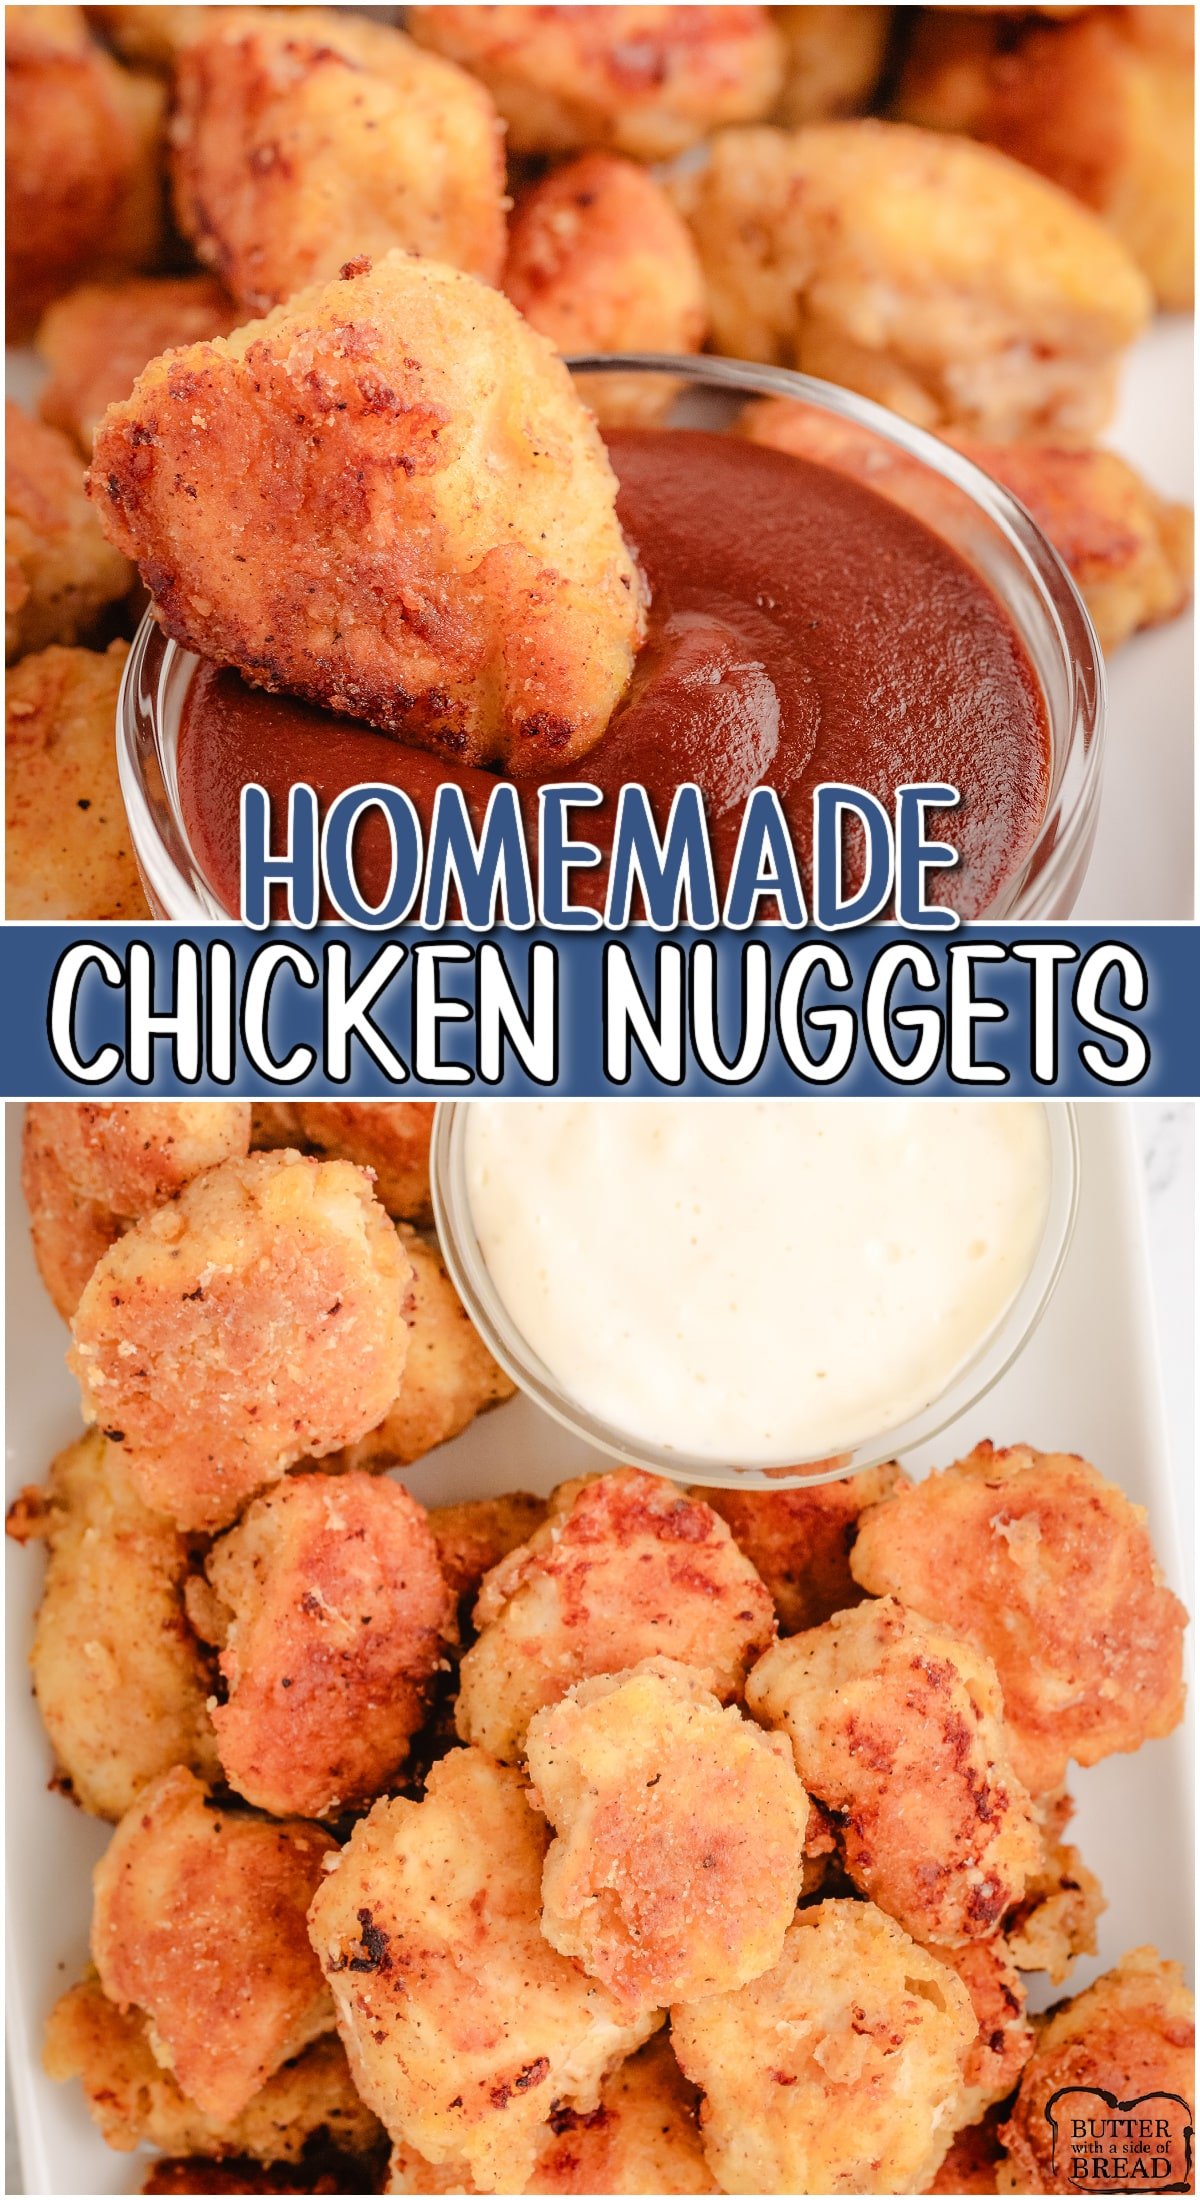 Homemade Chicken Nuggets with simple ingredients that your family won't be able to get enough of! Juicy nuggets made with a unique breading!